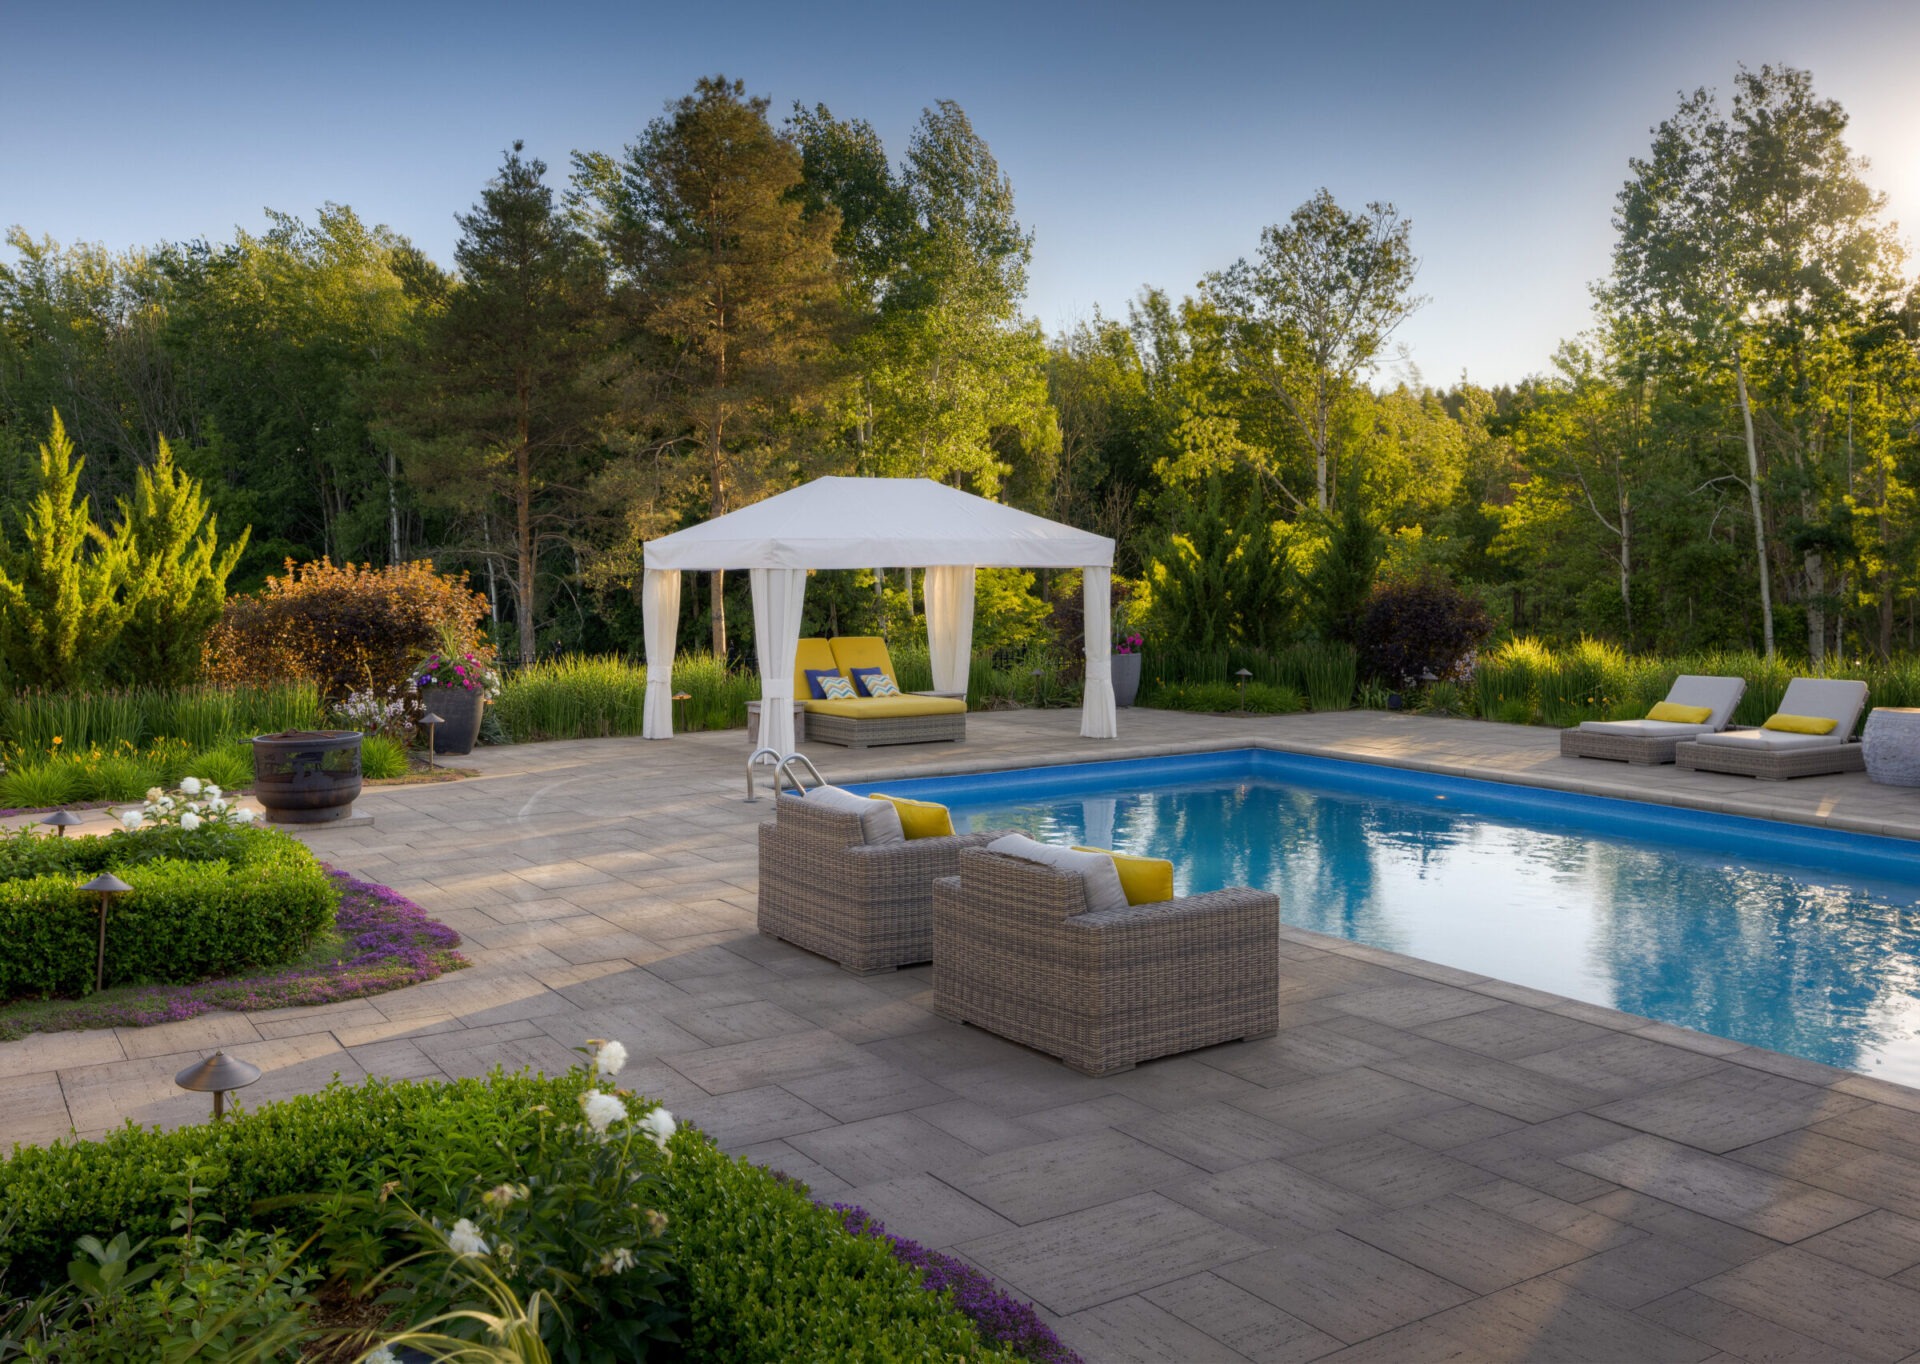 An outdoor pool with a white cabana and loungers surrounded by landscaped gardens, trees, and a clear sky as the sun sets.